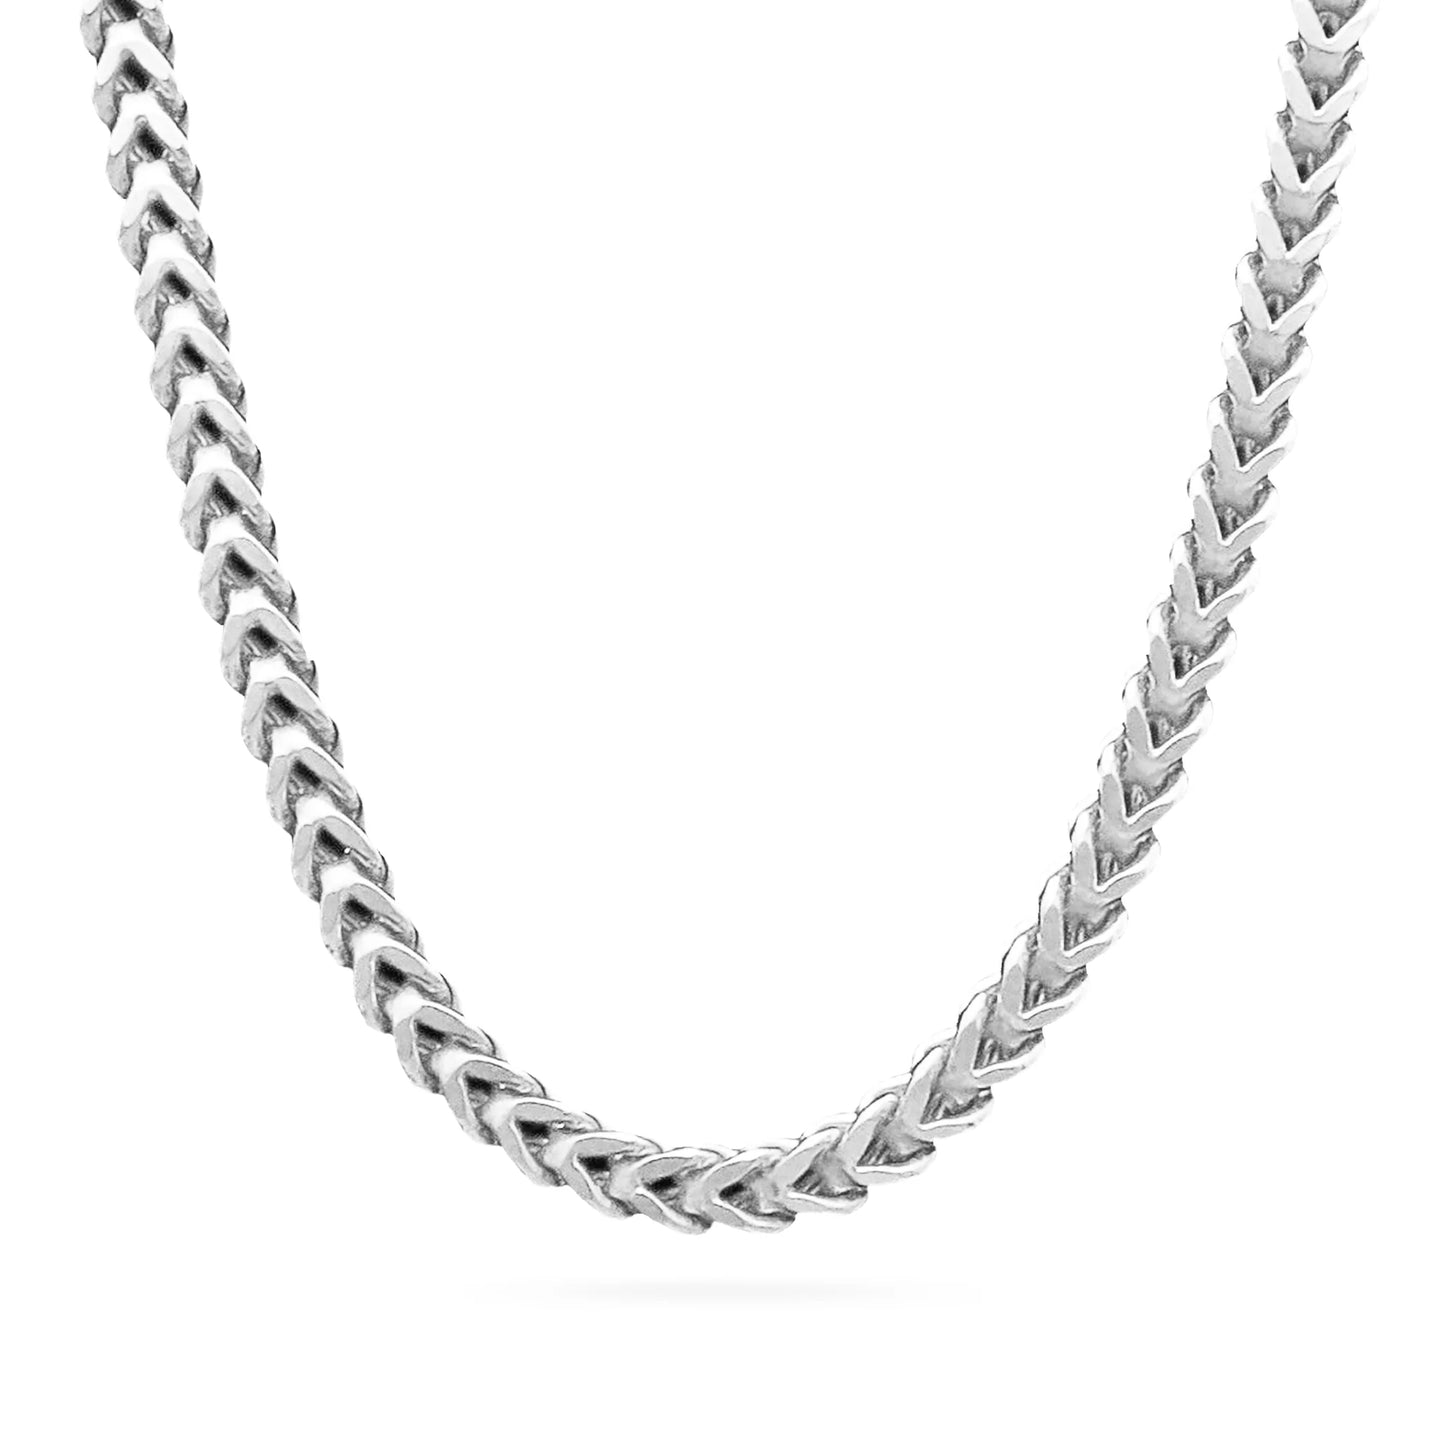 6MM FRANCO CHAIN - Moore Ice